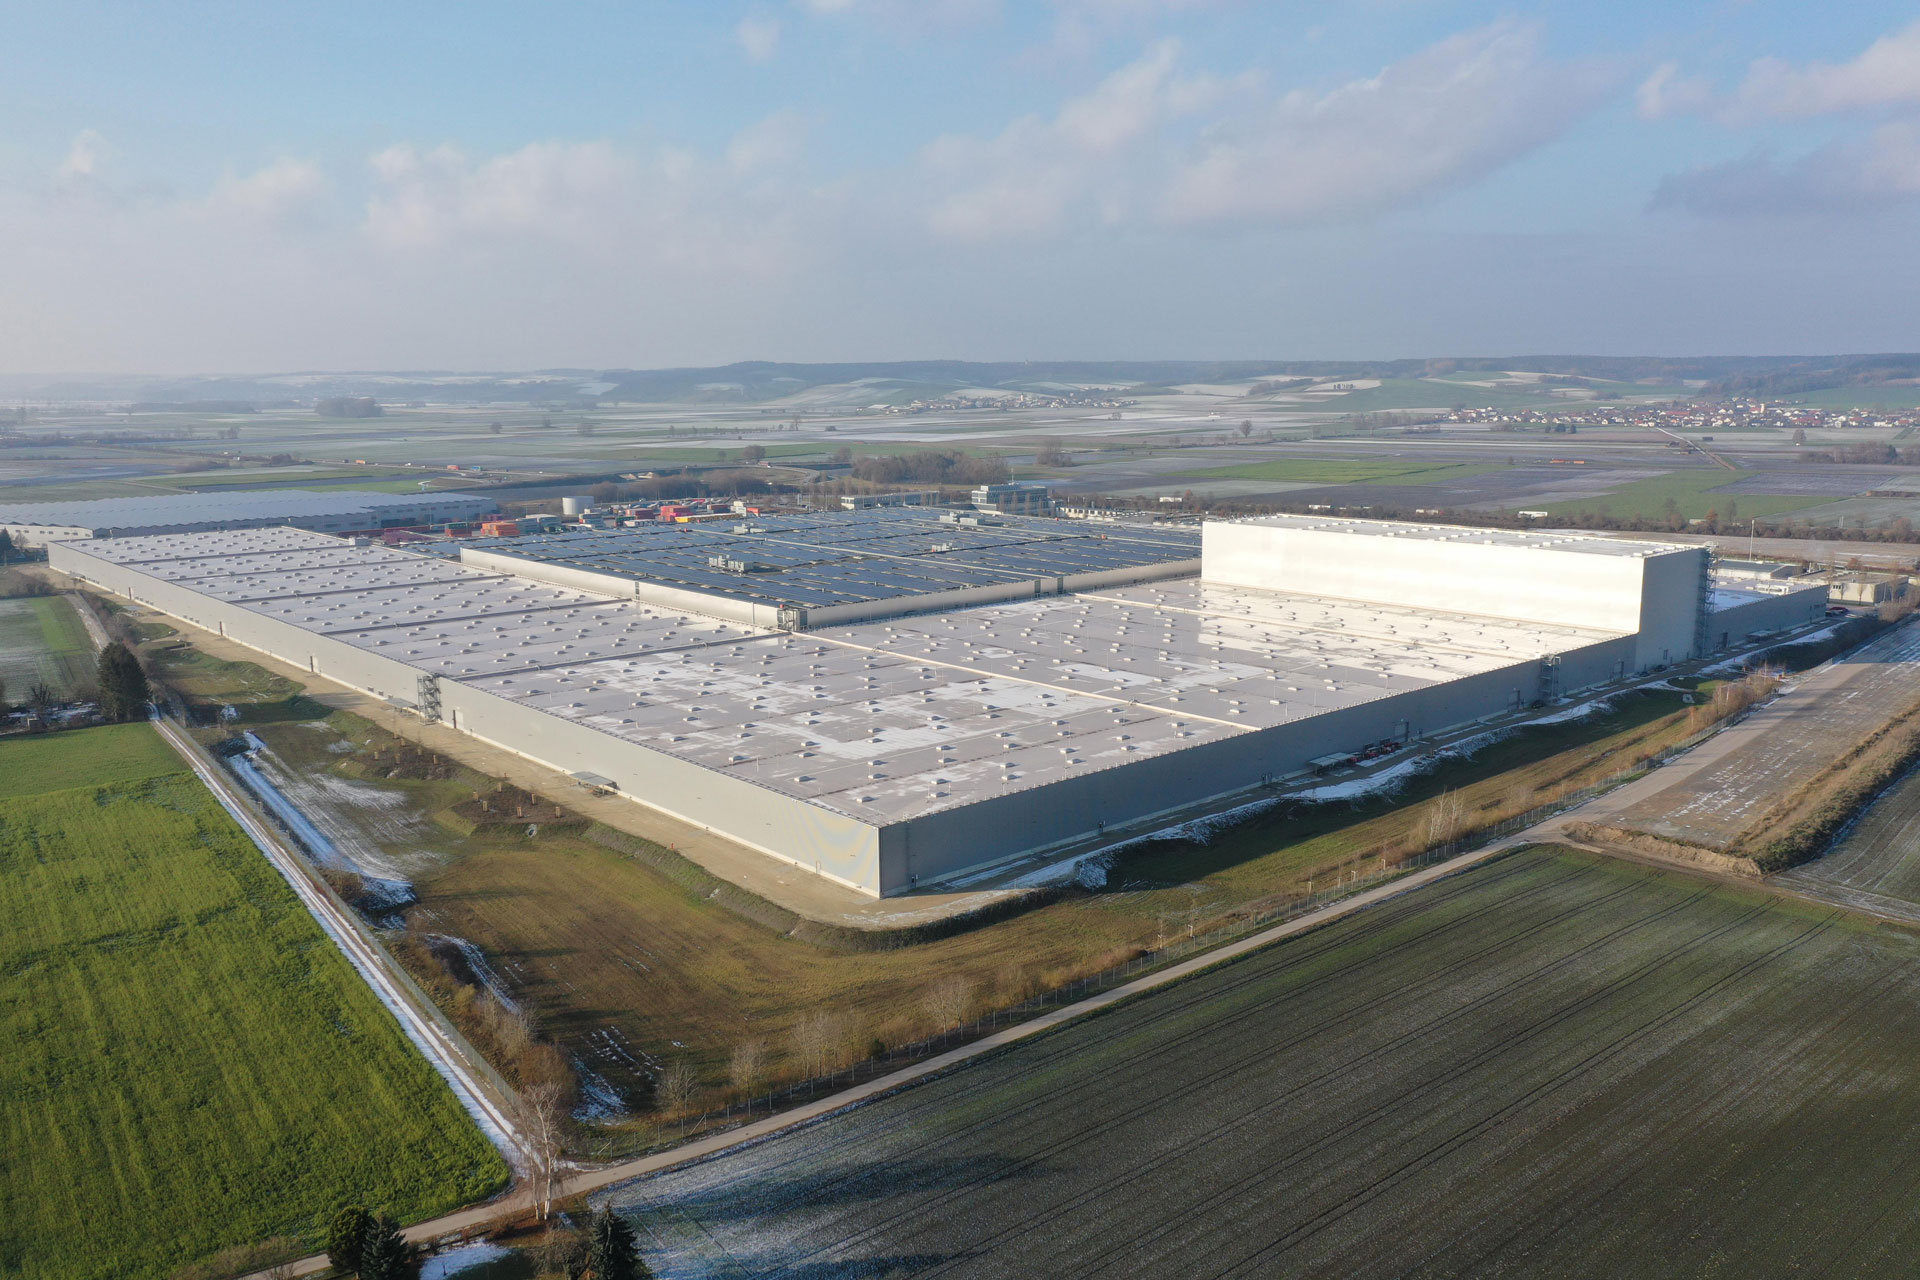 Birds-eye view of the BMW logistics centre in Dingolfing